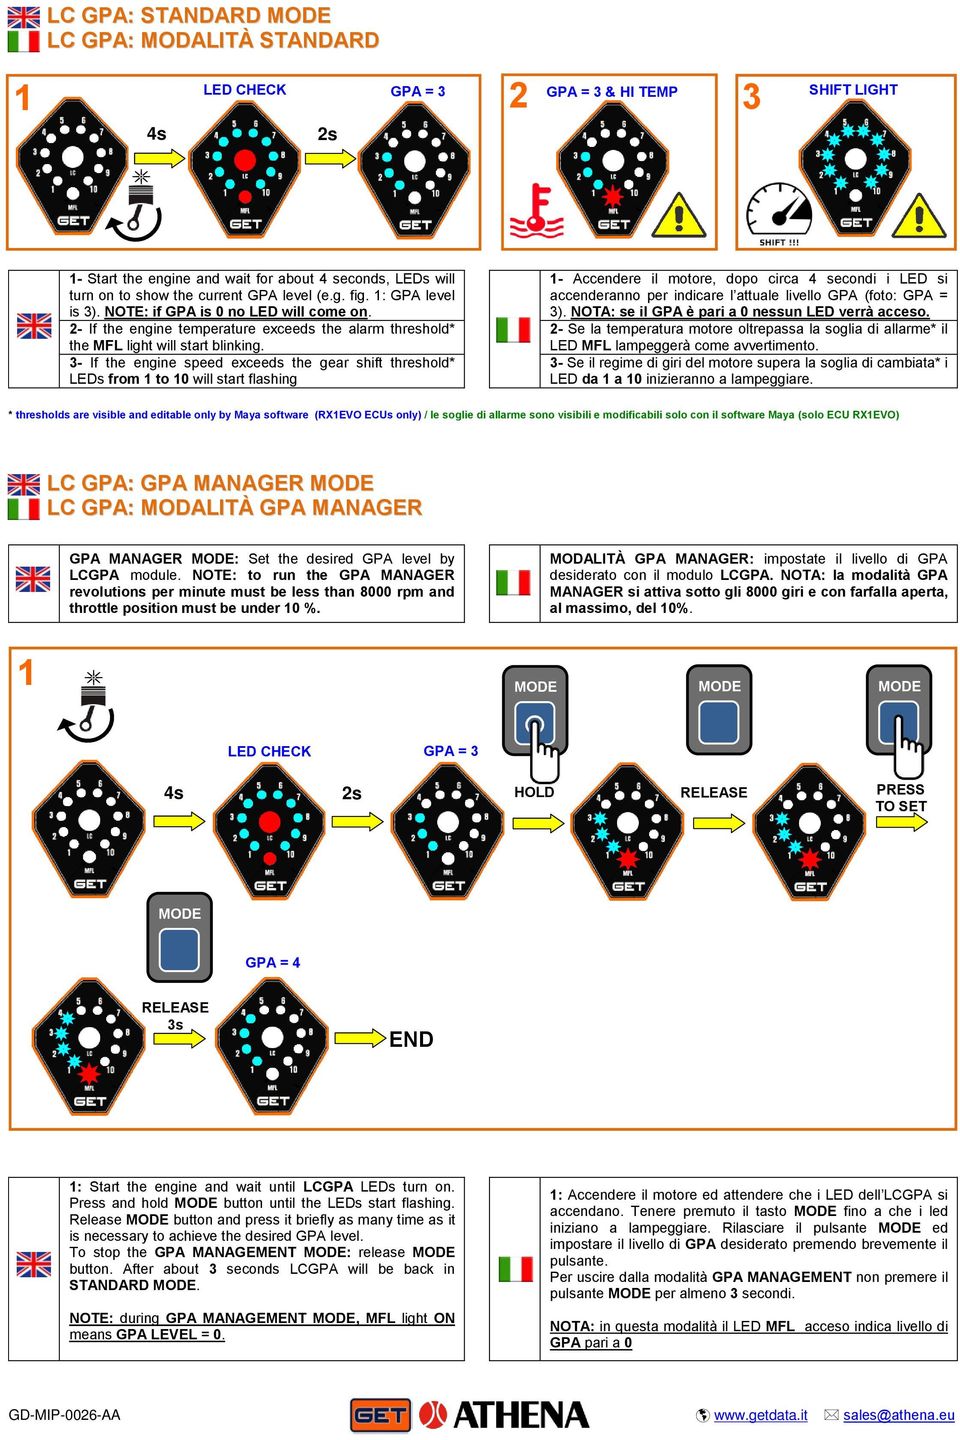 3- If the engine speed exceeds the gear shift threshold* LEDs from 1 to 10 will start flashing 1- Accendere il motore, dopo circa 4 secondi i LED si accenderanno per indicare l attuale livello GPA